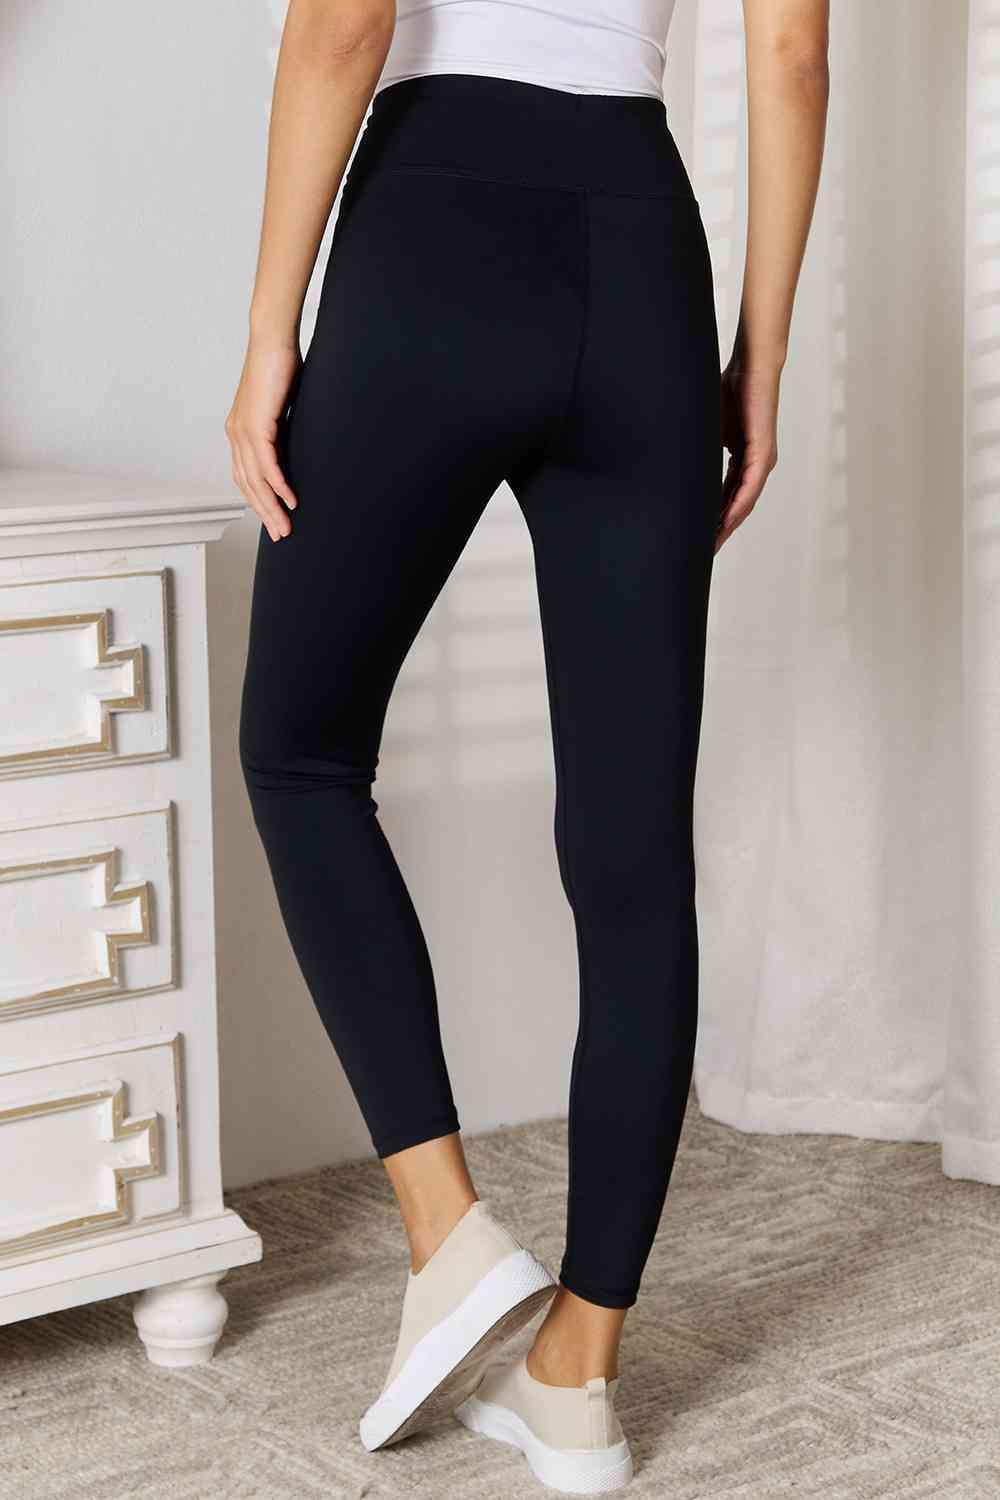 Move With Ease V-Waistband Active Fitness Leggings - MXSTUDIO.COM